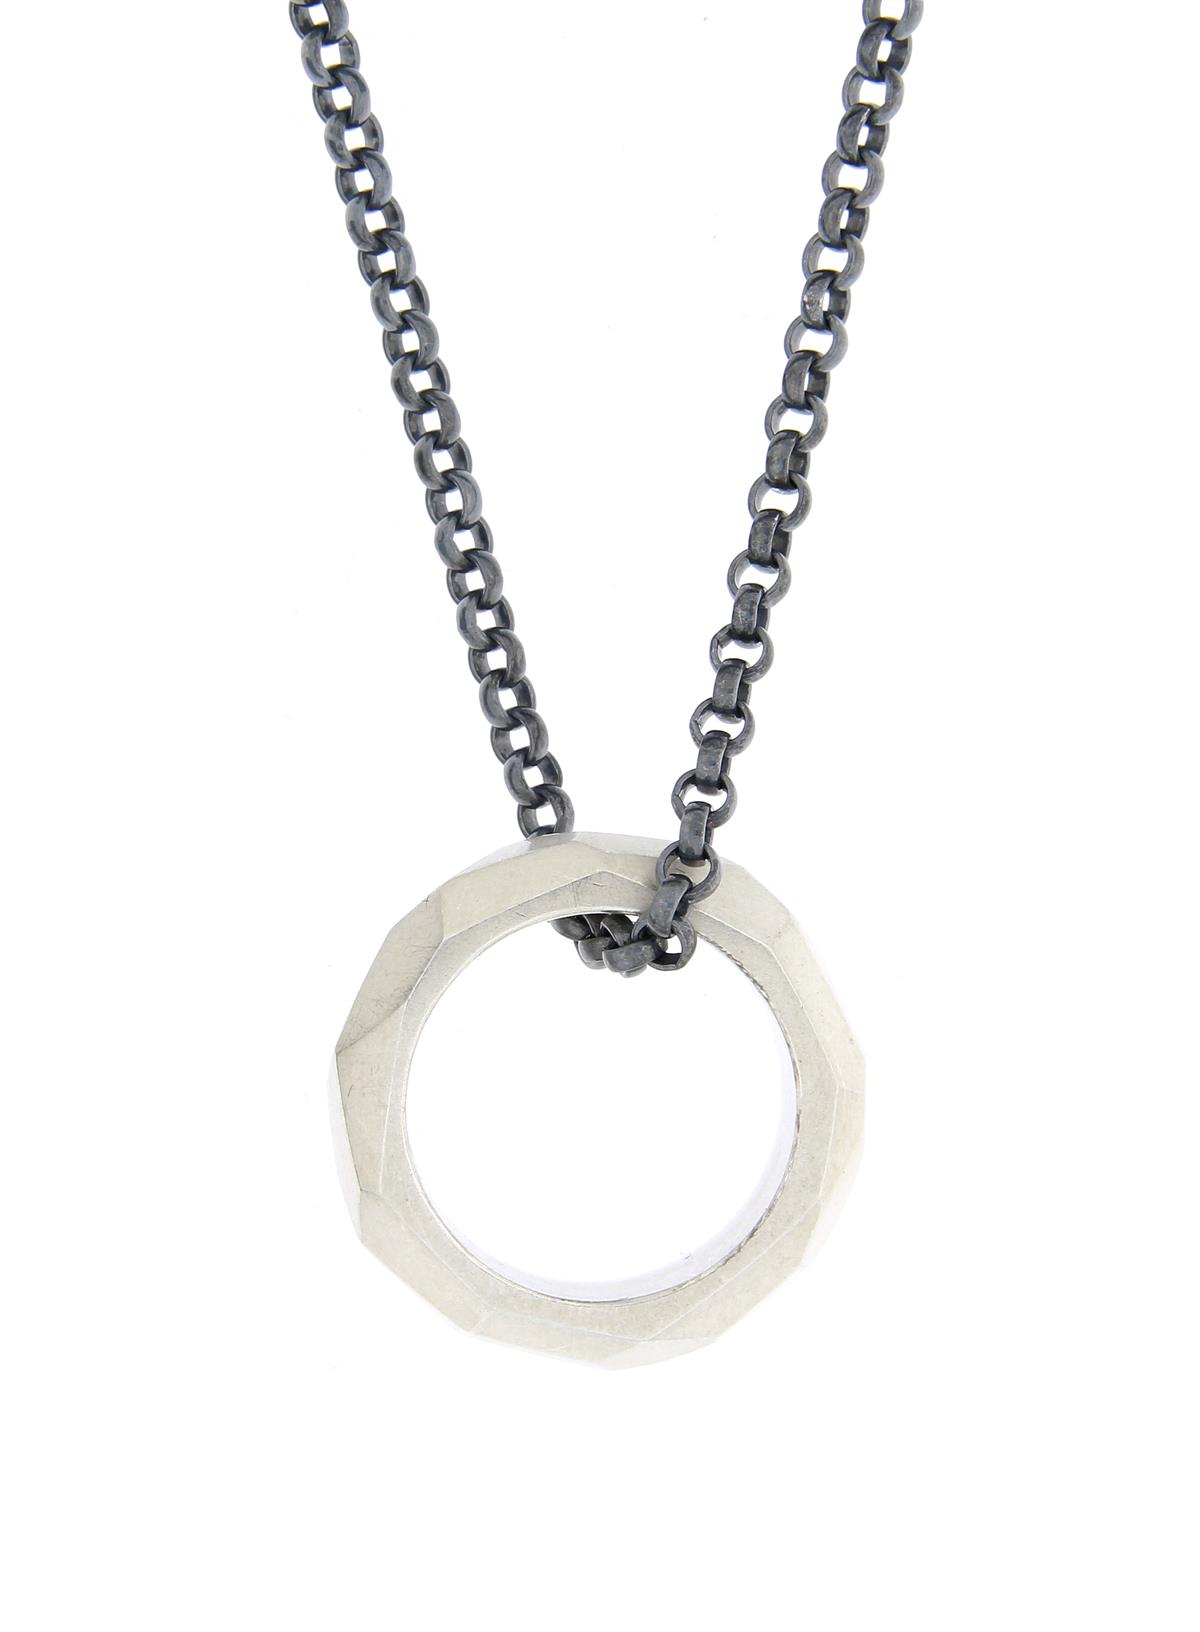 Katie g. Jewellery_Wide Ring - Silver White - Black chunk chain